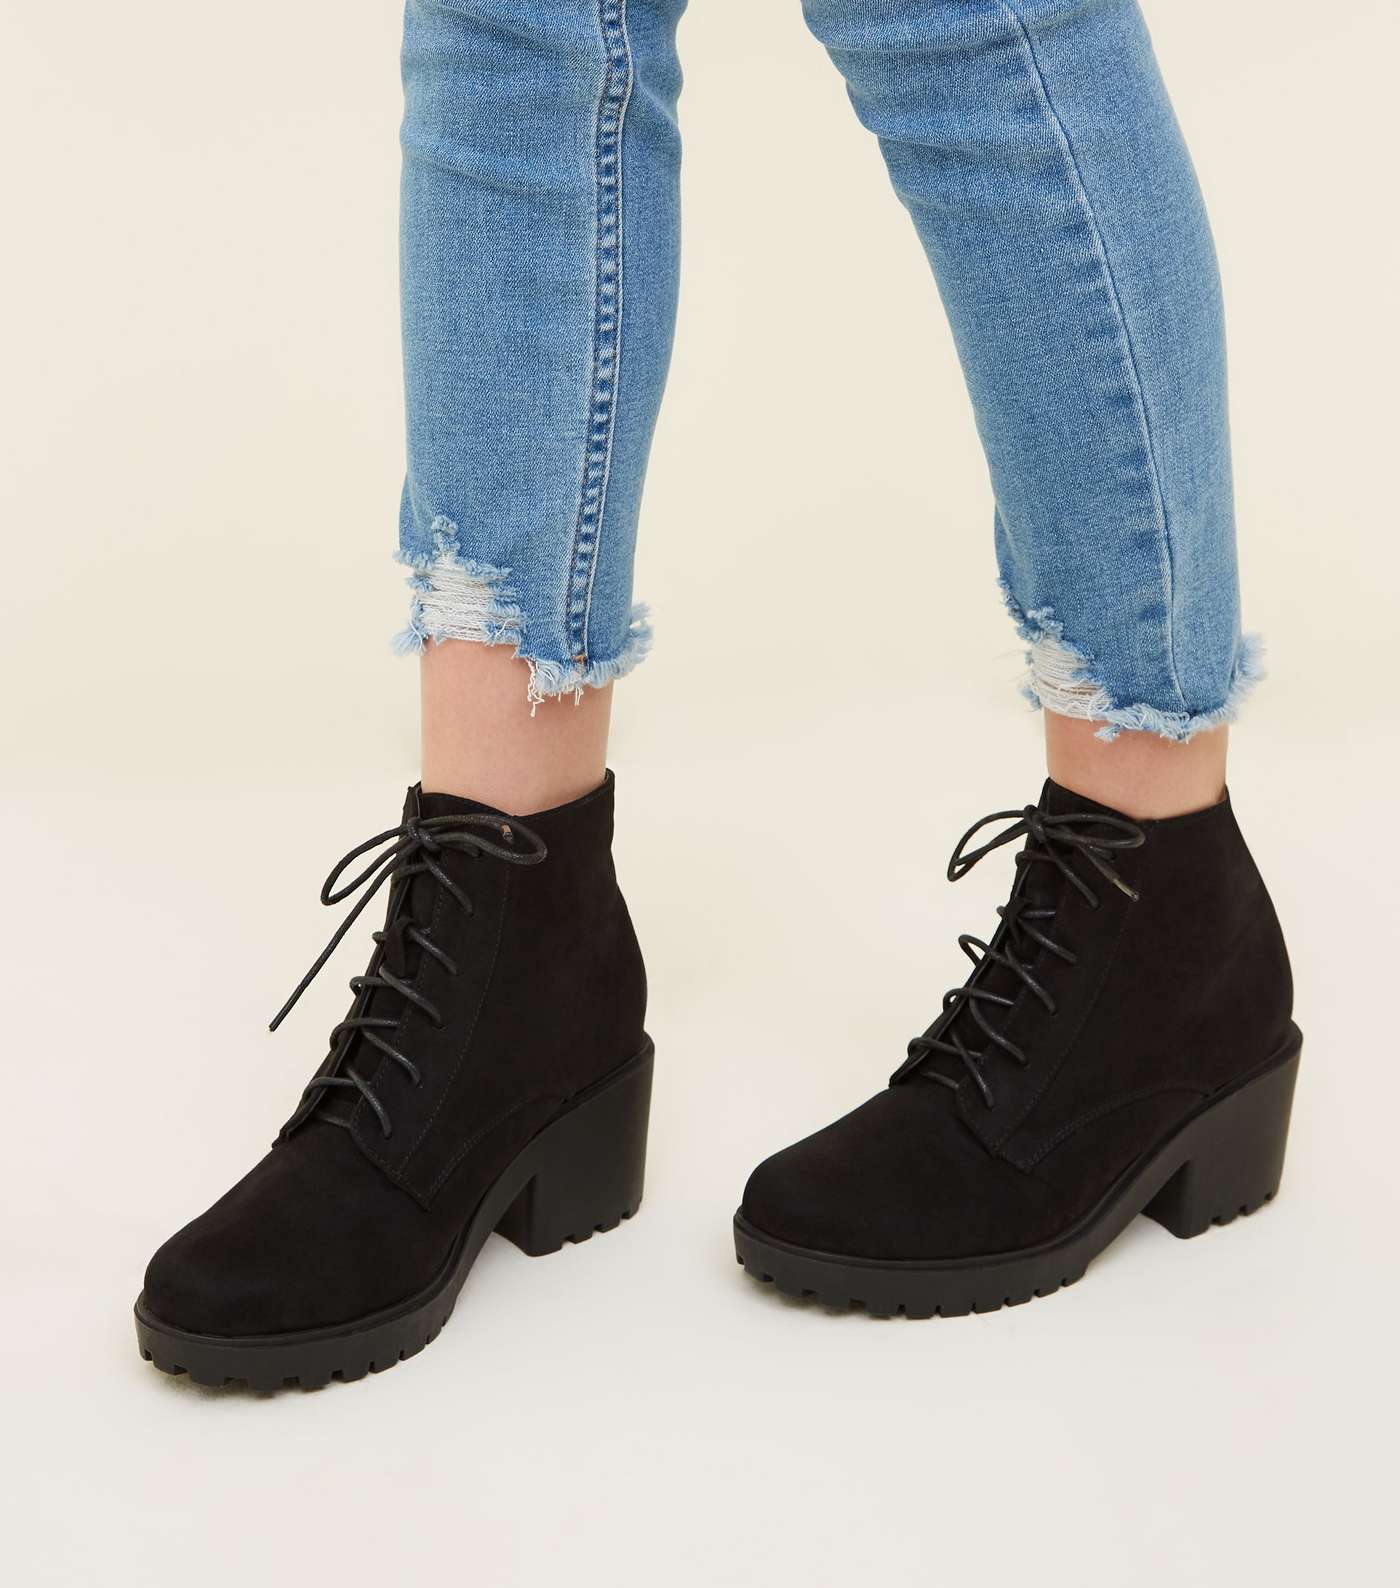 Girls Black Suedette Chunky Heel Lace Up Boots Image 2